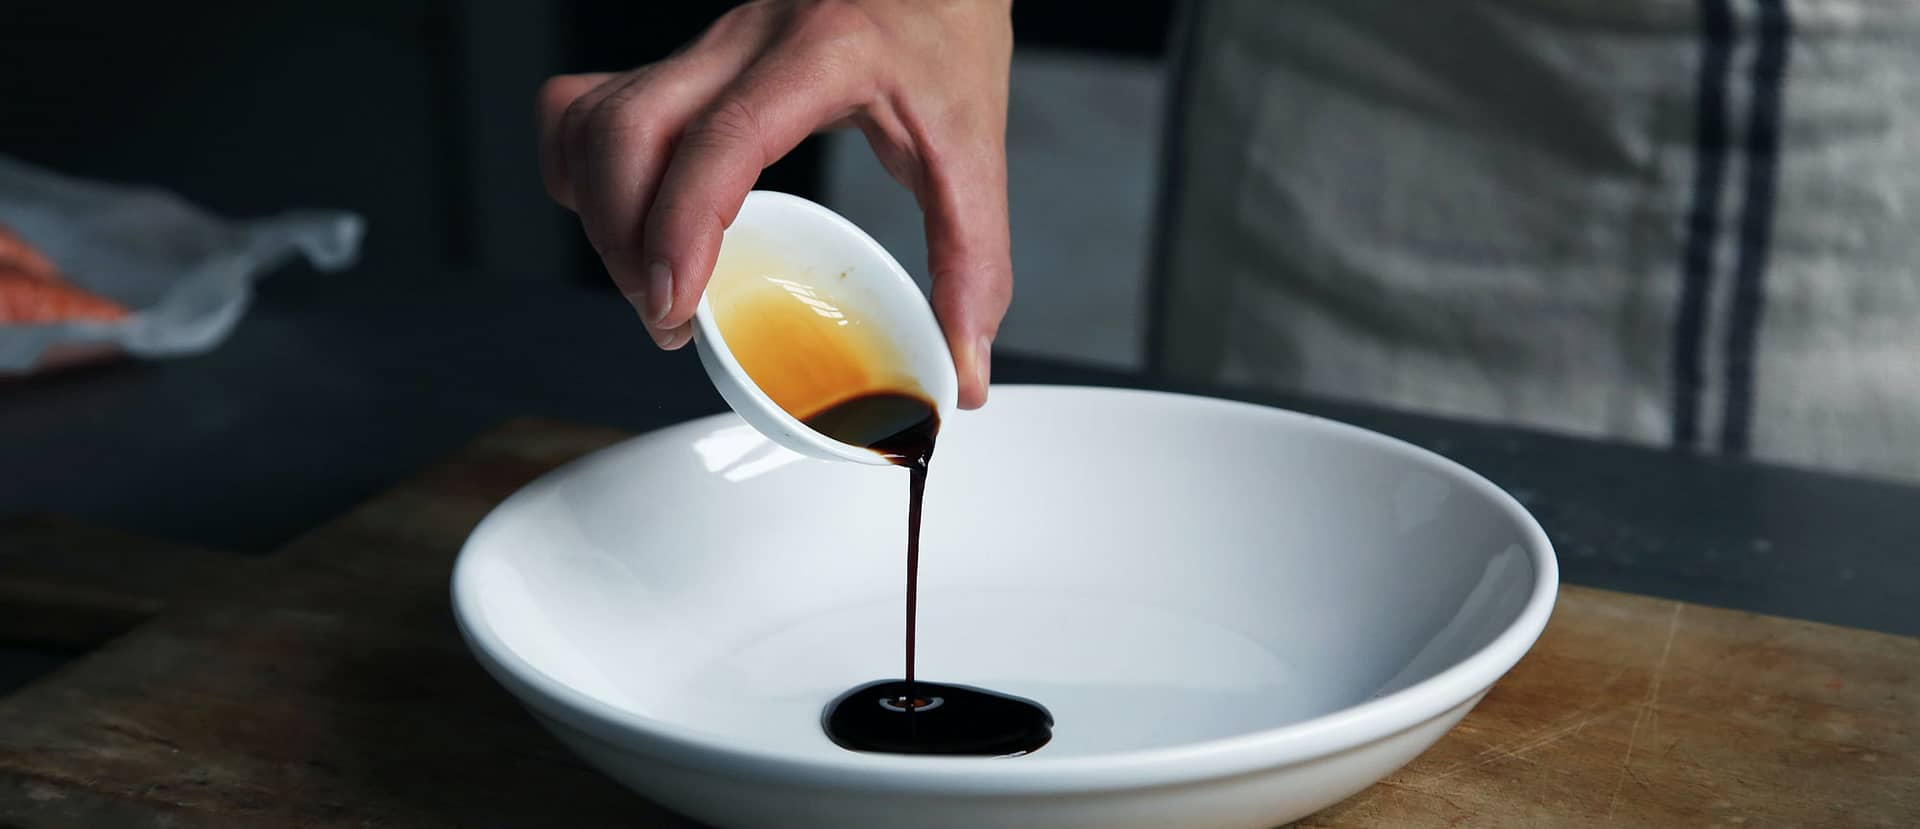 Japanese sauce being poured in an empty white bowl